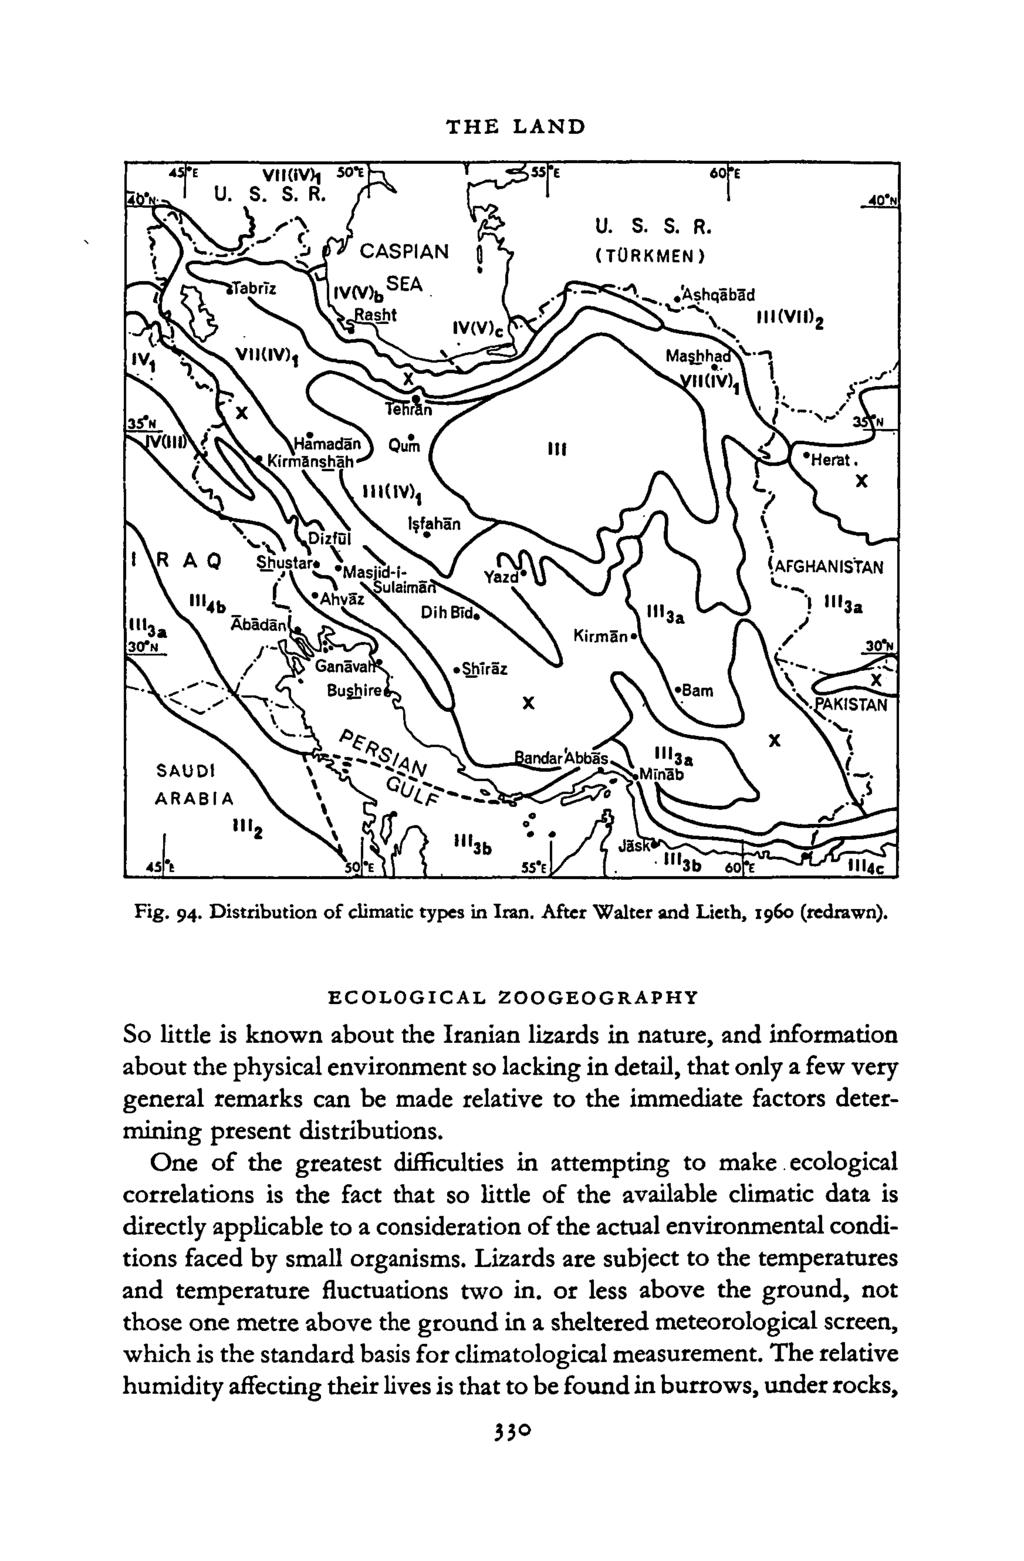 THE LAND U. S. S. R. (TURKMEN) ^..'AshqabSd SAUDI ARABIA in A Fig. 94. Distribution of climatic types in Iran. After Walter and Lieth, i960 (redrawn).